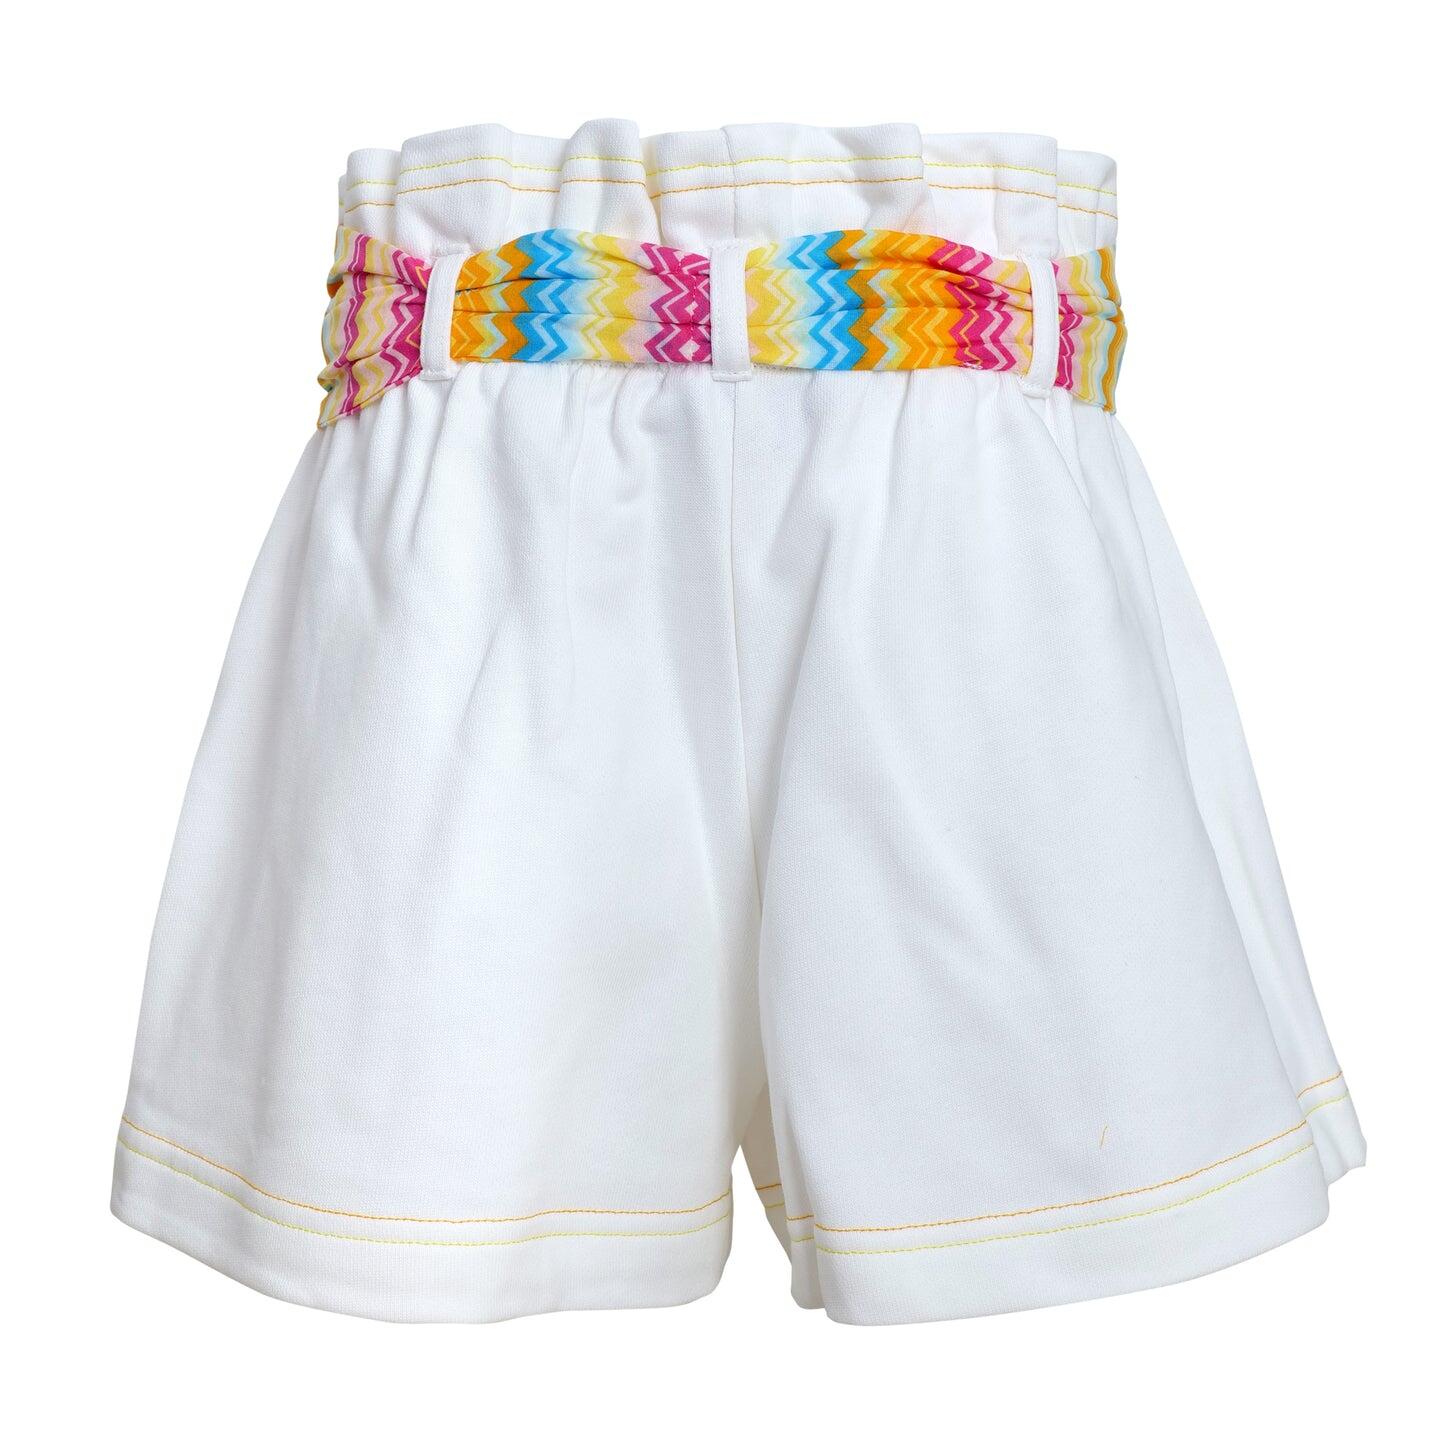 White Shorts With Zigzag Printed Belt For Girls